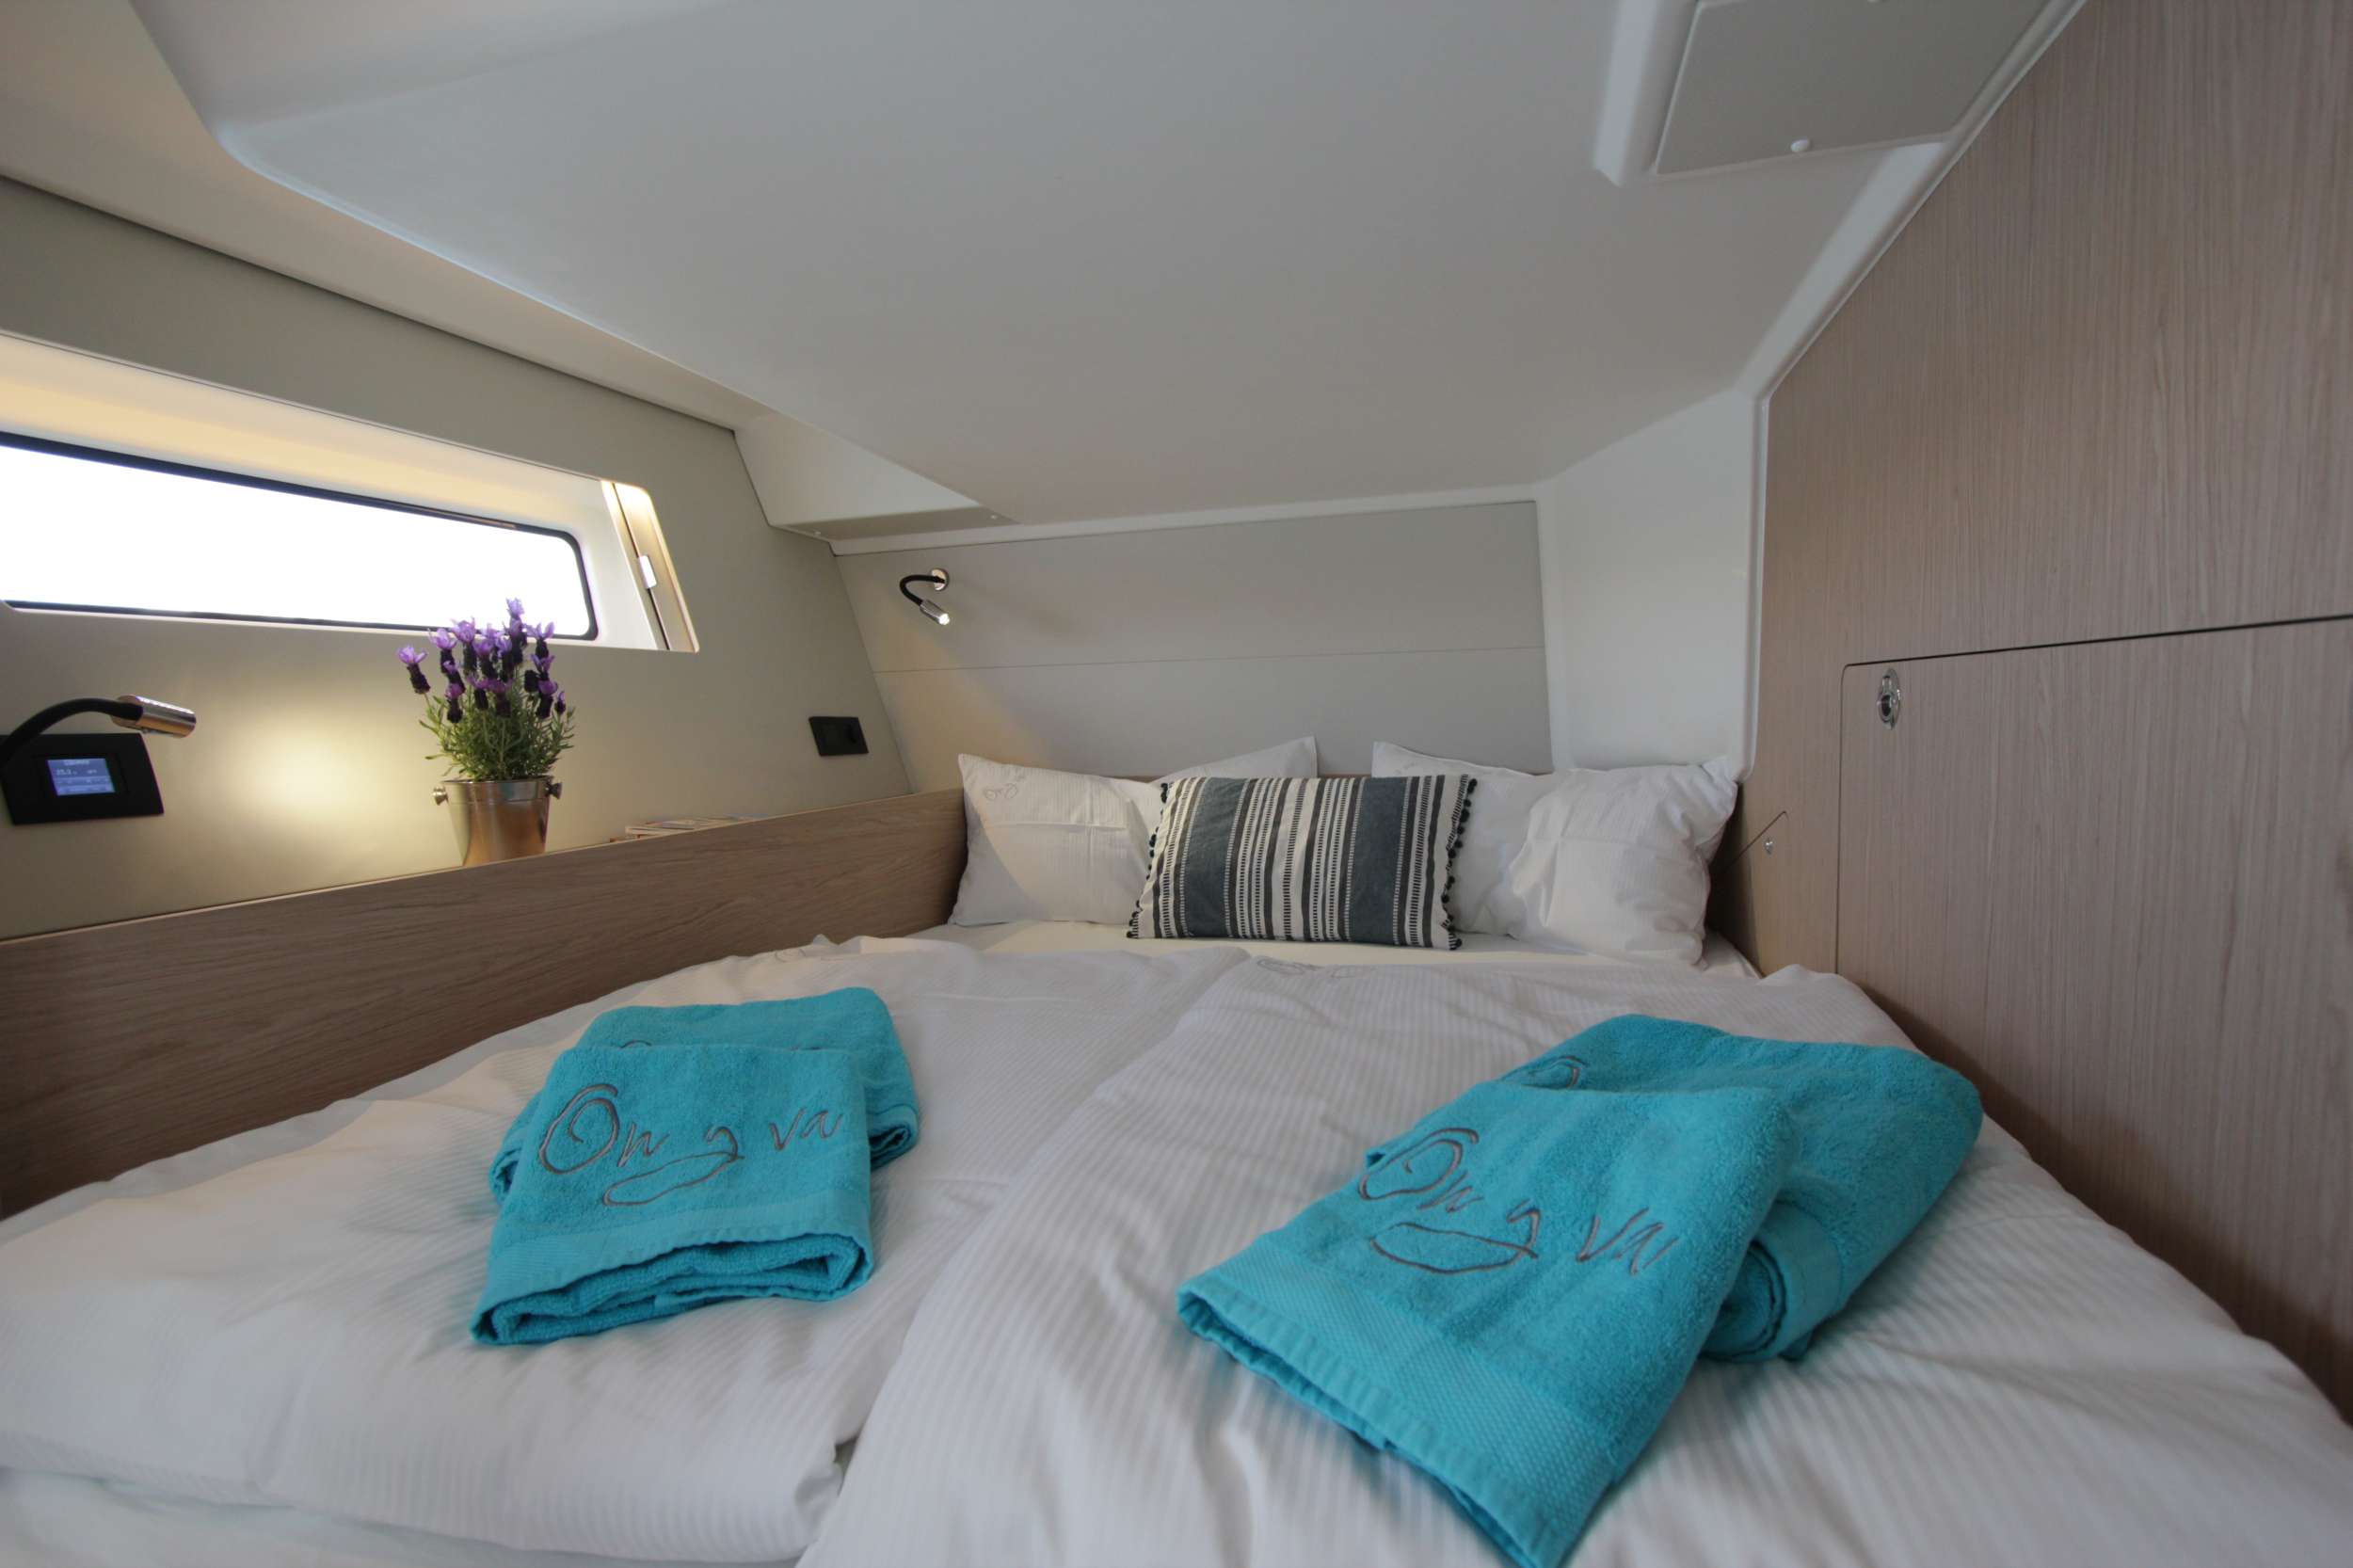 ON Y VA Yacht Charter - Guest Cabin 2